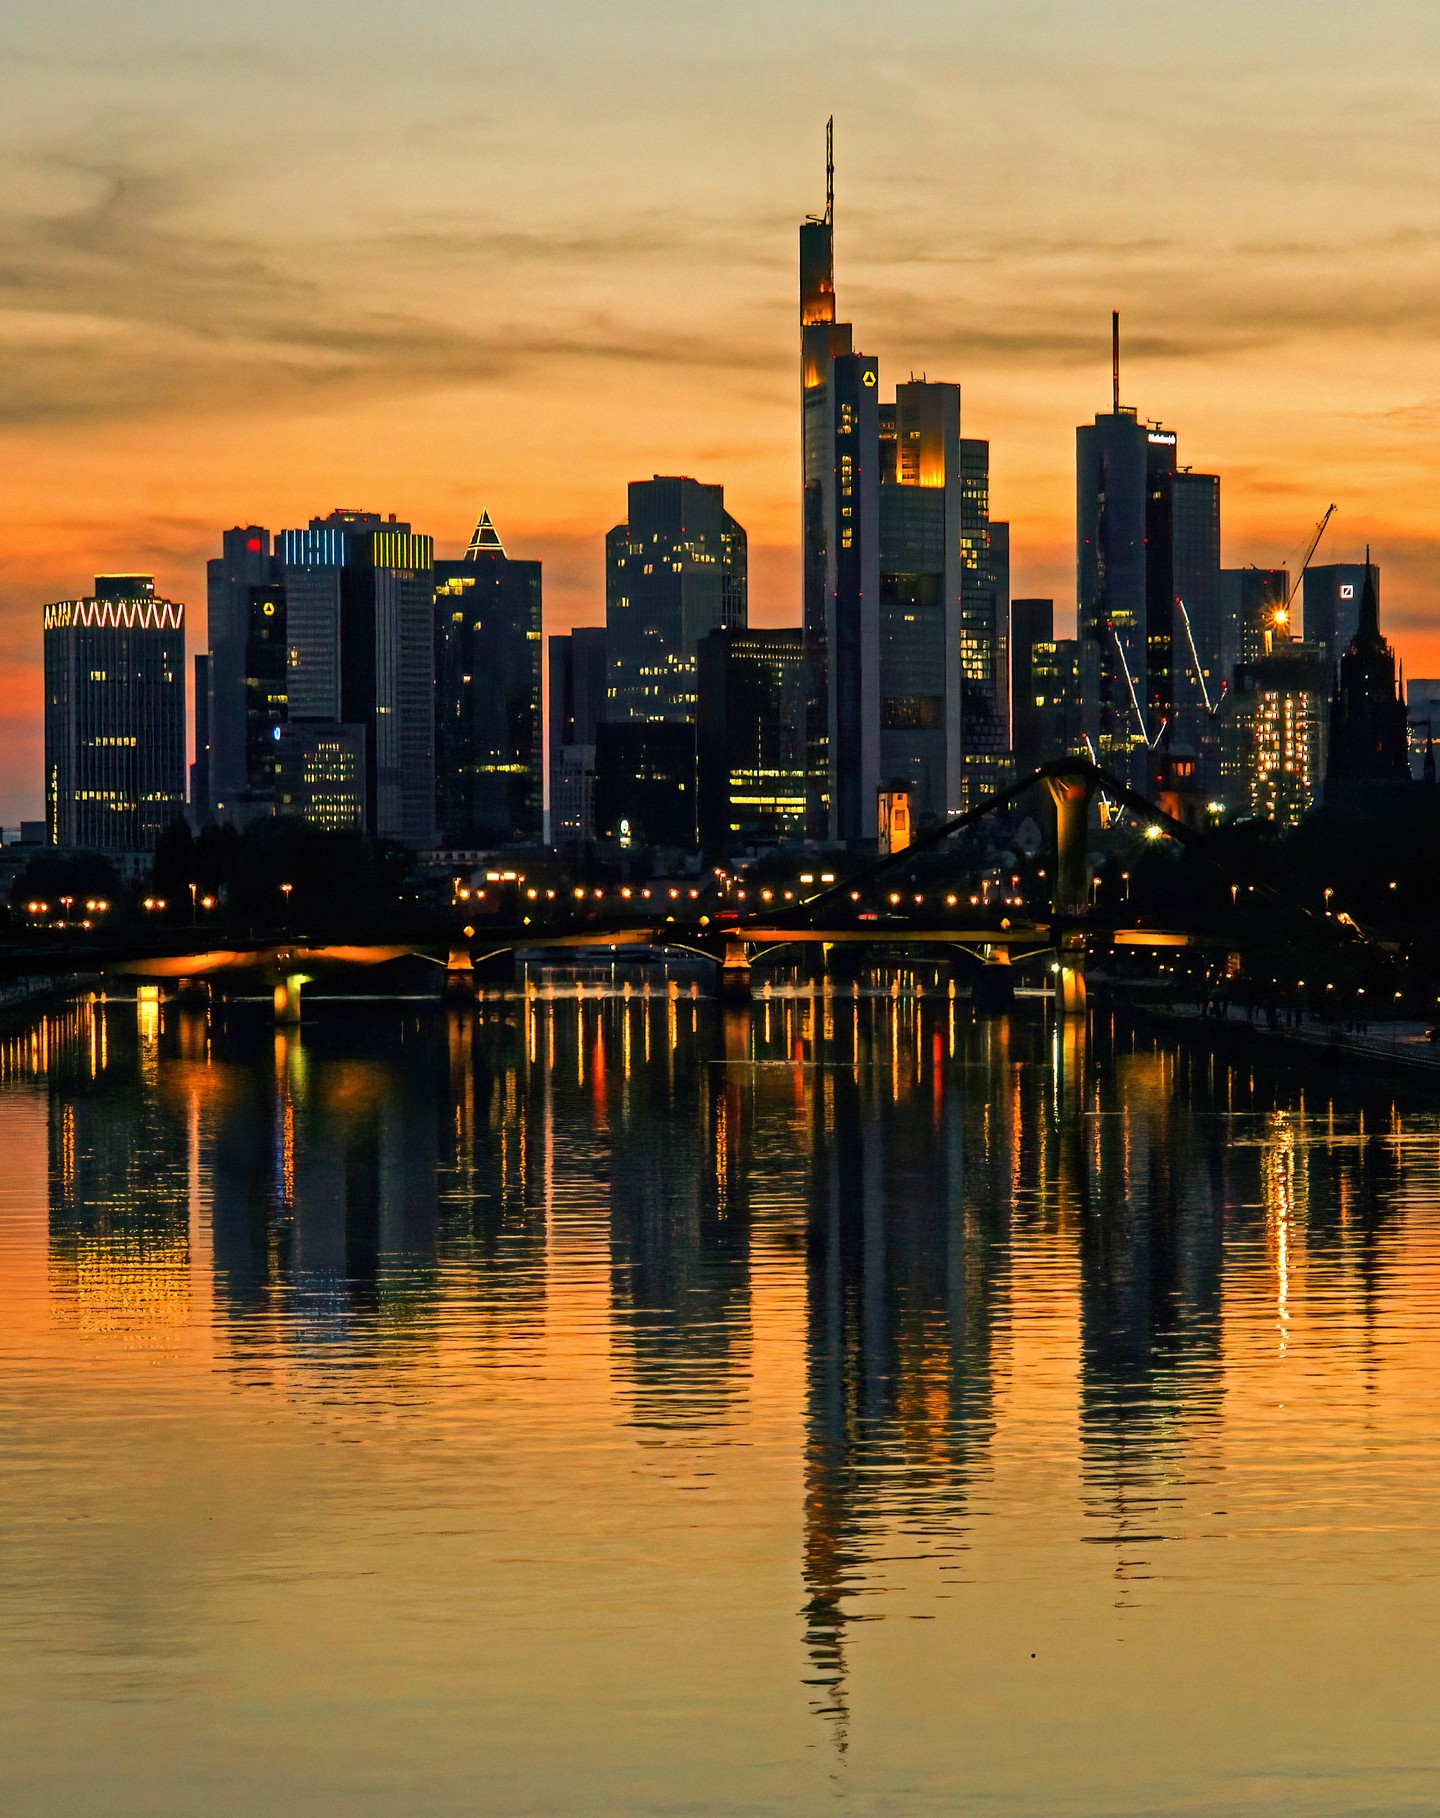 Frankfurter sunset... Golden hour over the city water front (with a bit of post processing just to boost up its beauty)

#goldenhour #ilovefrankfurt #discovereurope #businesscity #travelphotography #orangesky #waterfront #picoftheday #investmentbanking #kommerzbank #maintower #omniturmfrankfurt #frankfurtcity